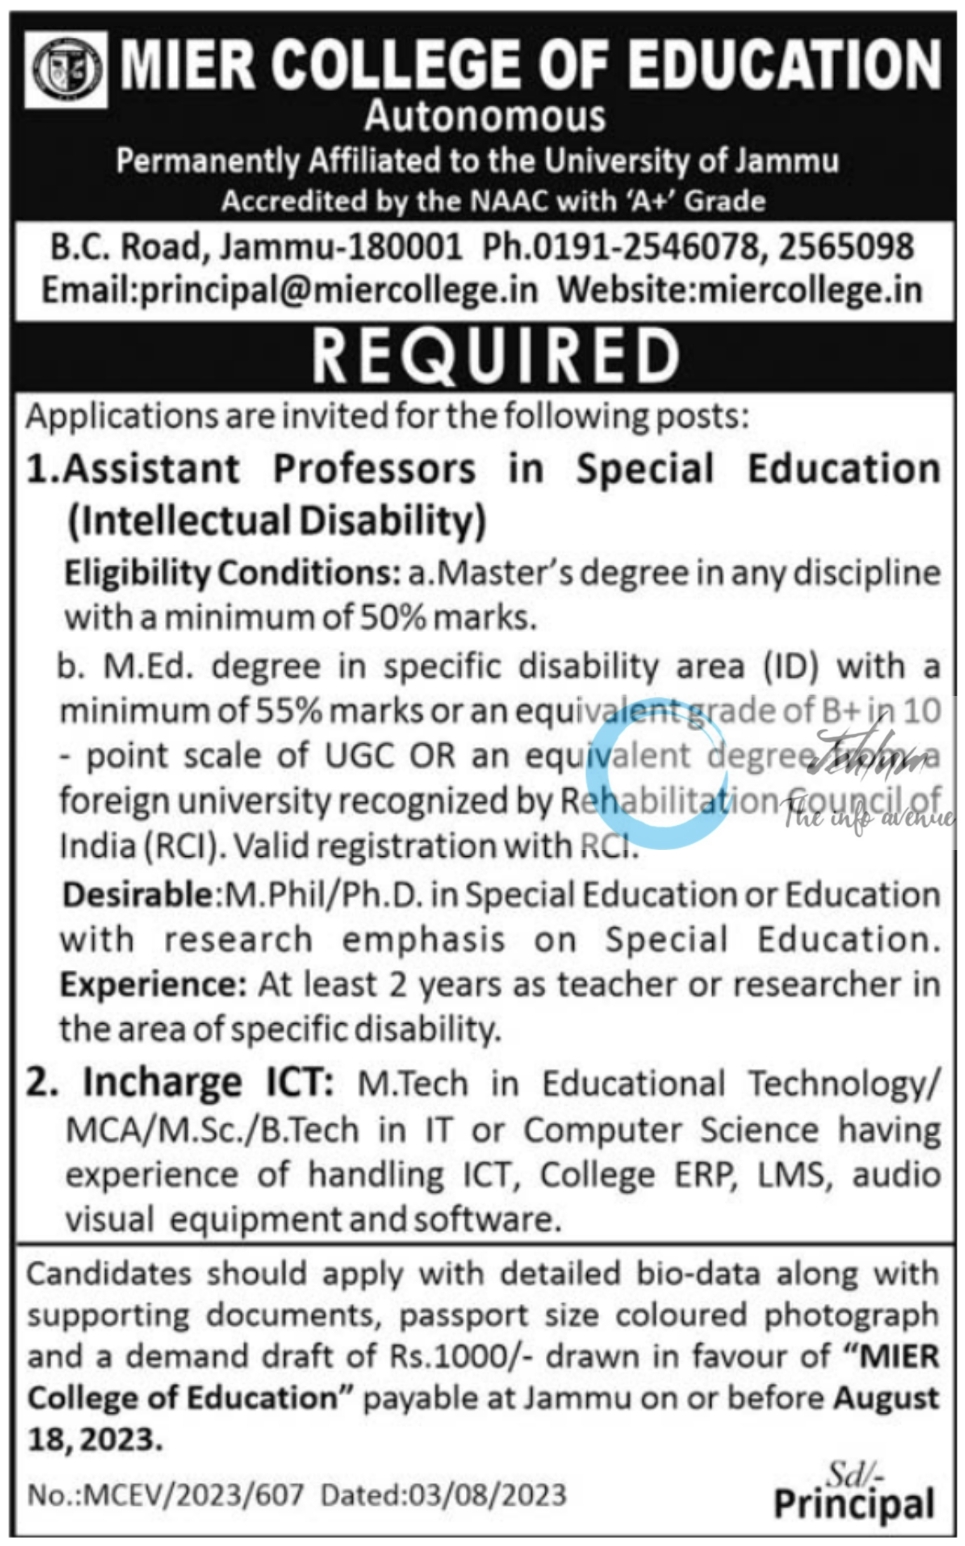 MIER COLLEGE OF EDUCATION JAMMU JOBS NOTIFICATION 2023